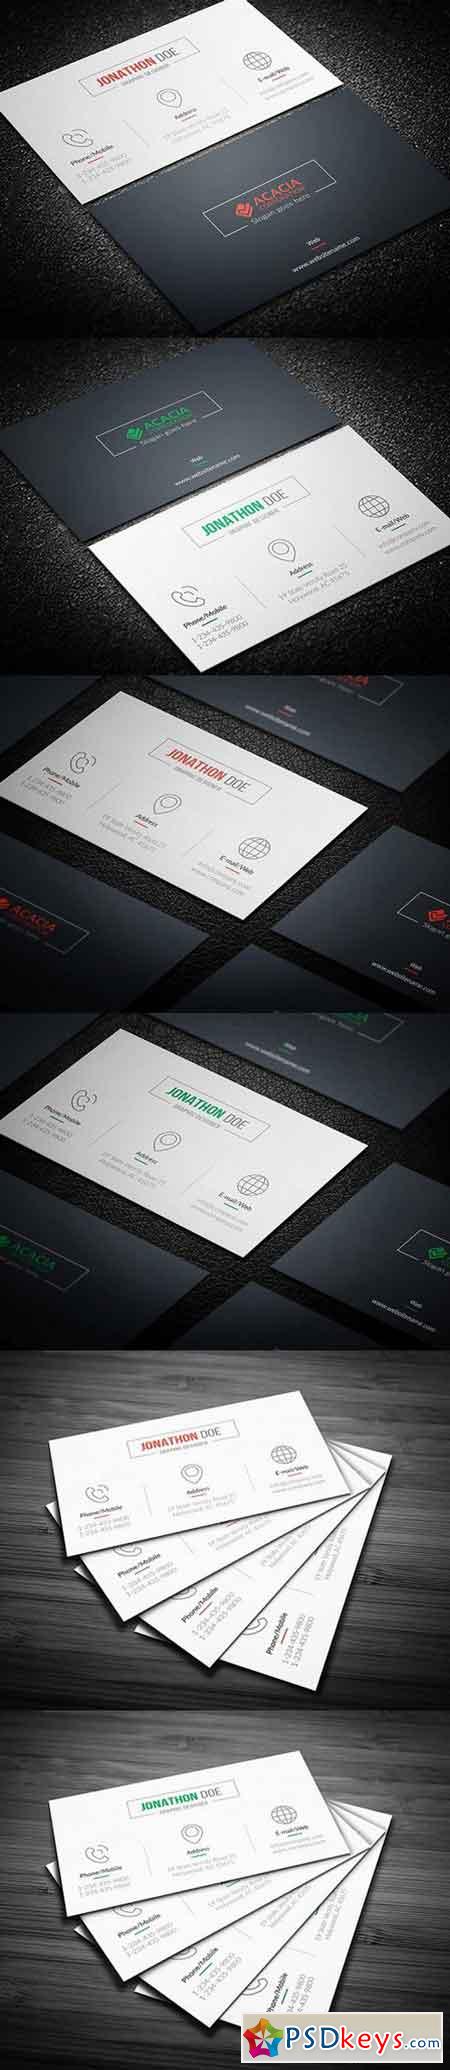 Sleek and simple Business Card 791170